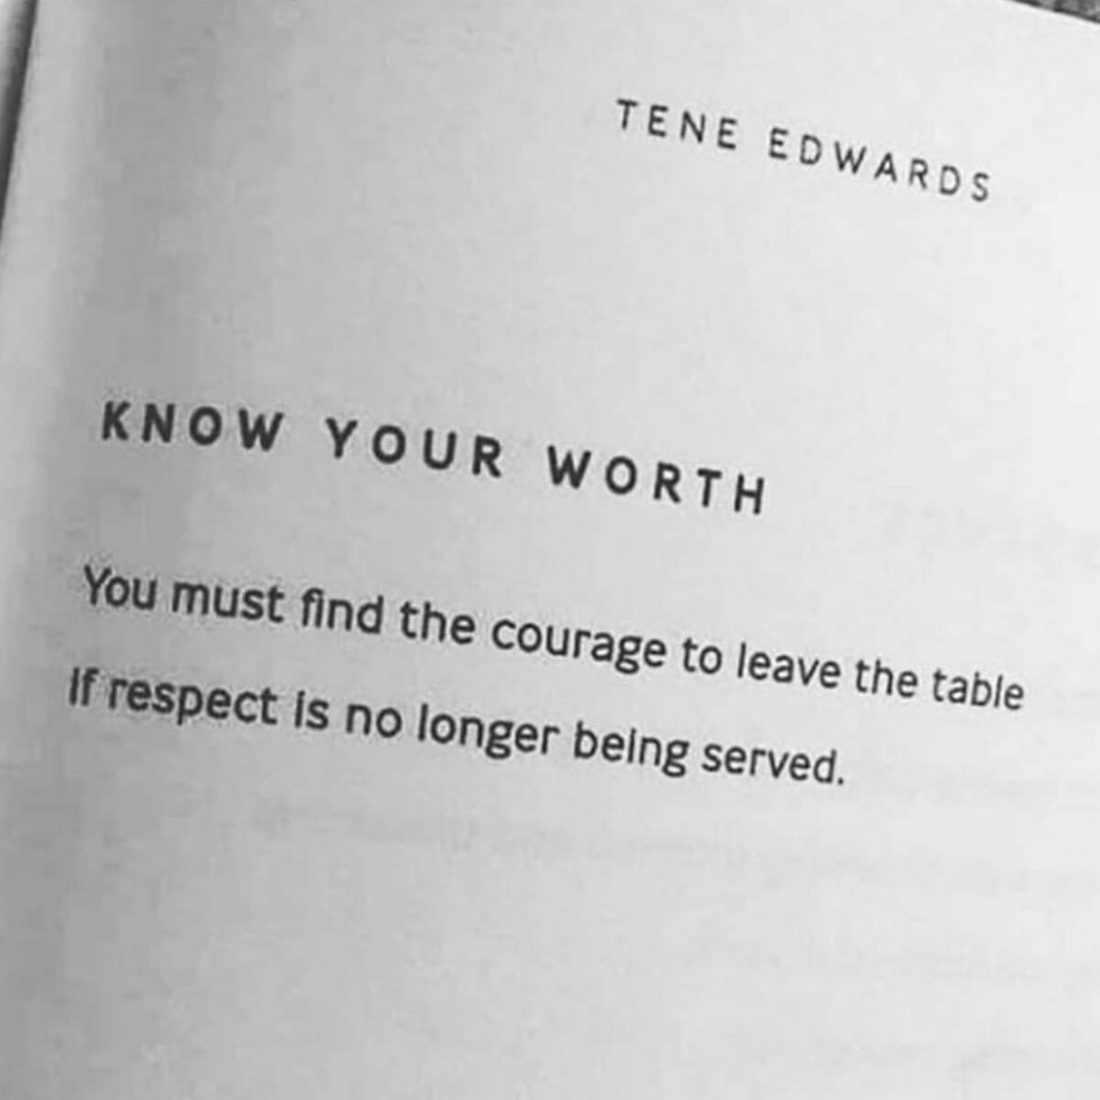 Know your worth 🙏💜